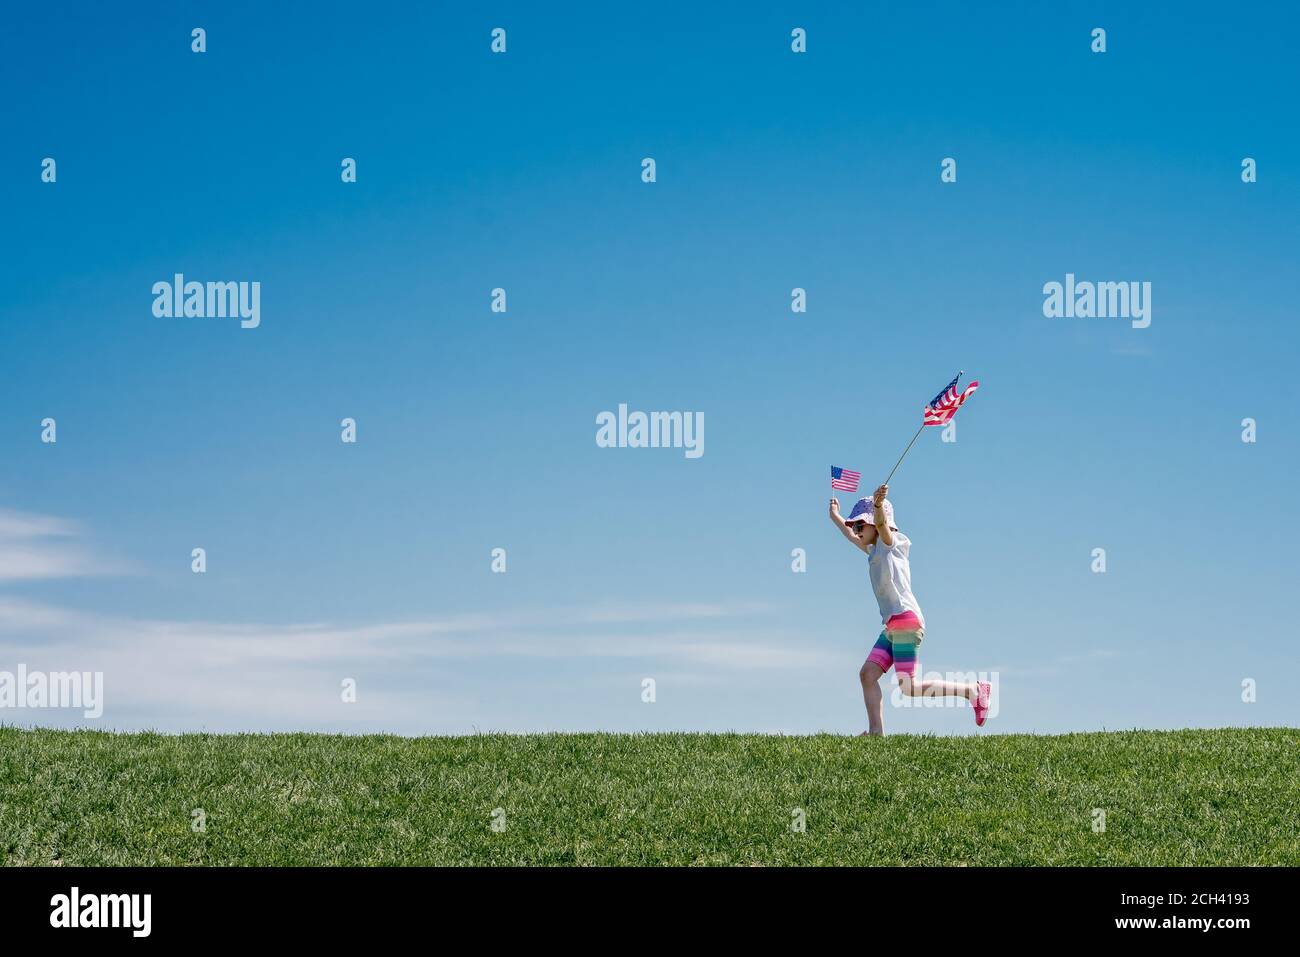 young girl leaps across a grass hill waving 2 American flags Stock Photo